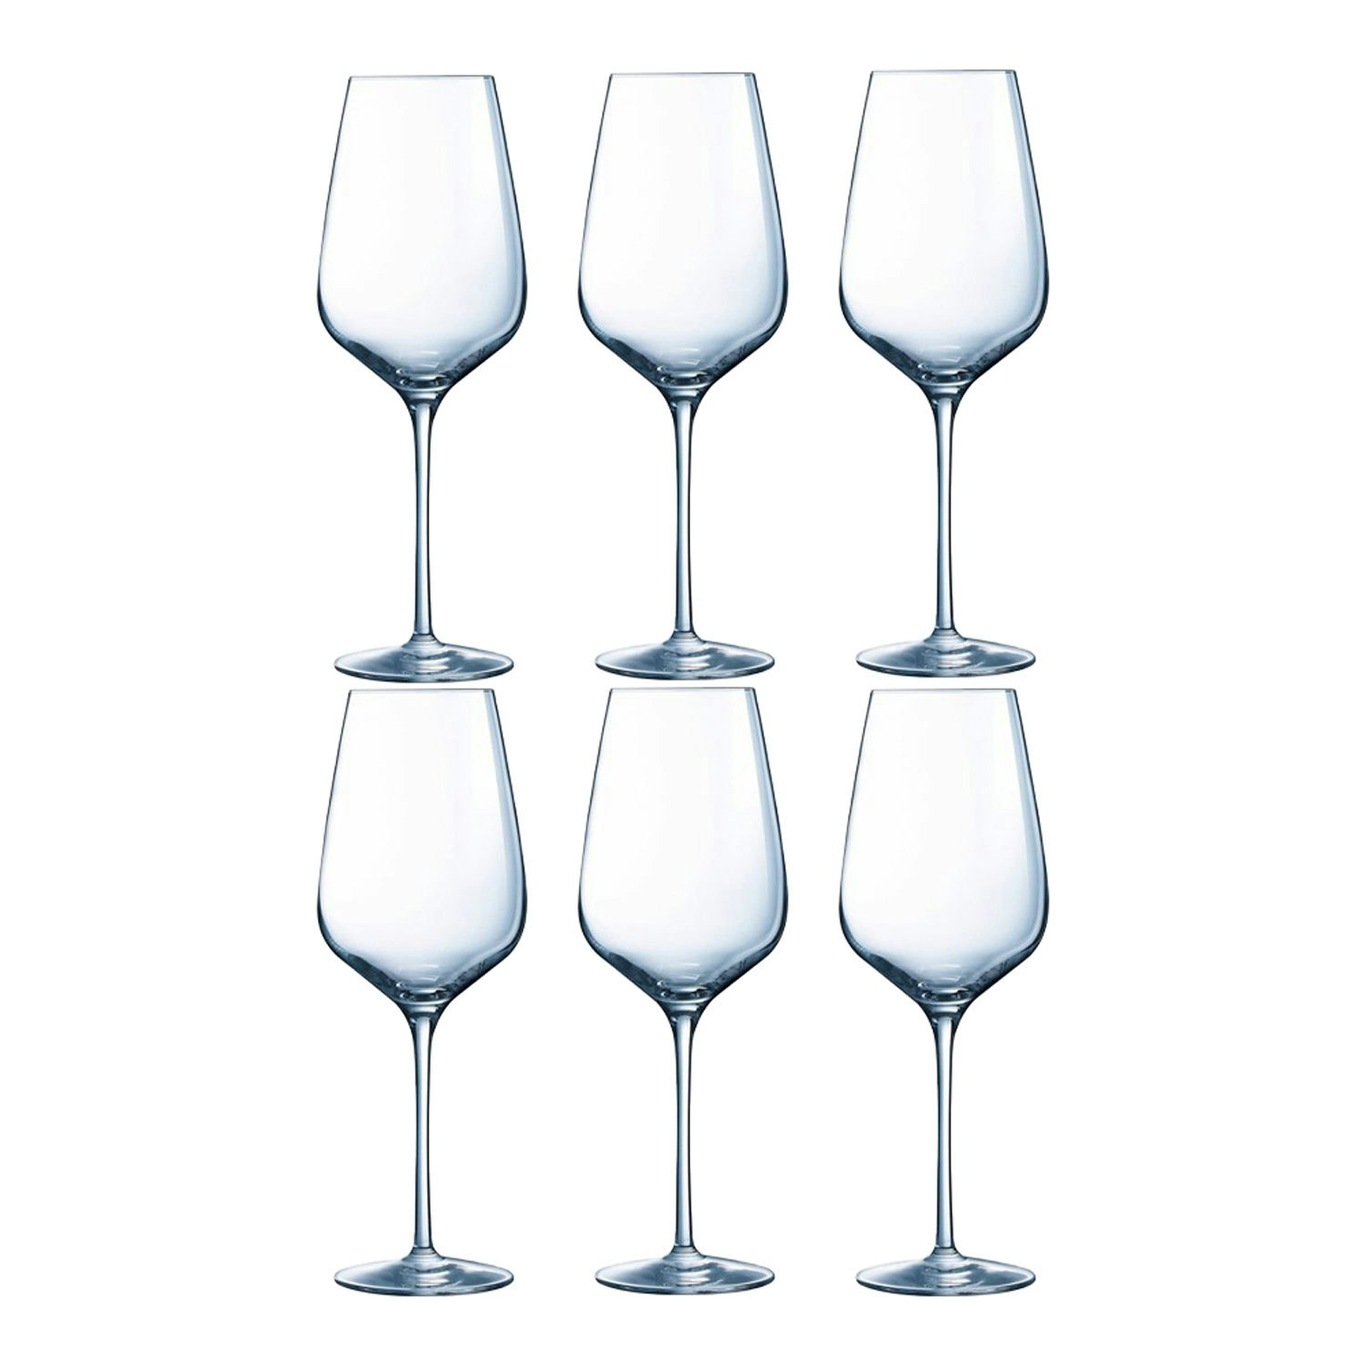 https://royaldesign.com/image/2/chefsommelier-sublym-white-wine-glass-25-cl-6-pack-0?w=800&quality=80